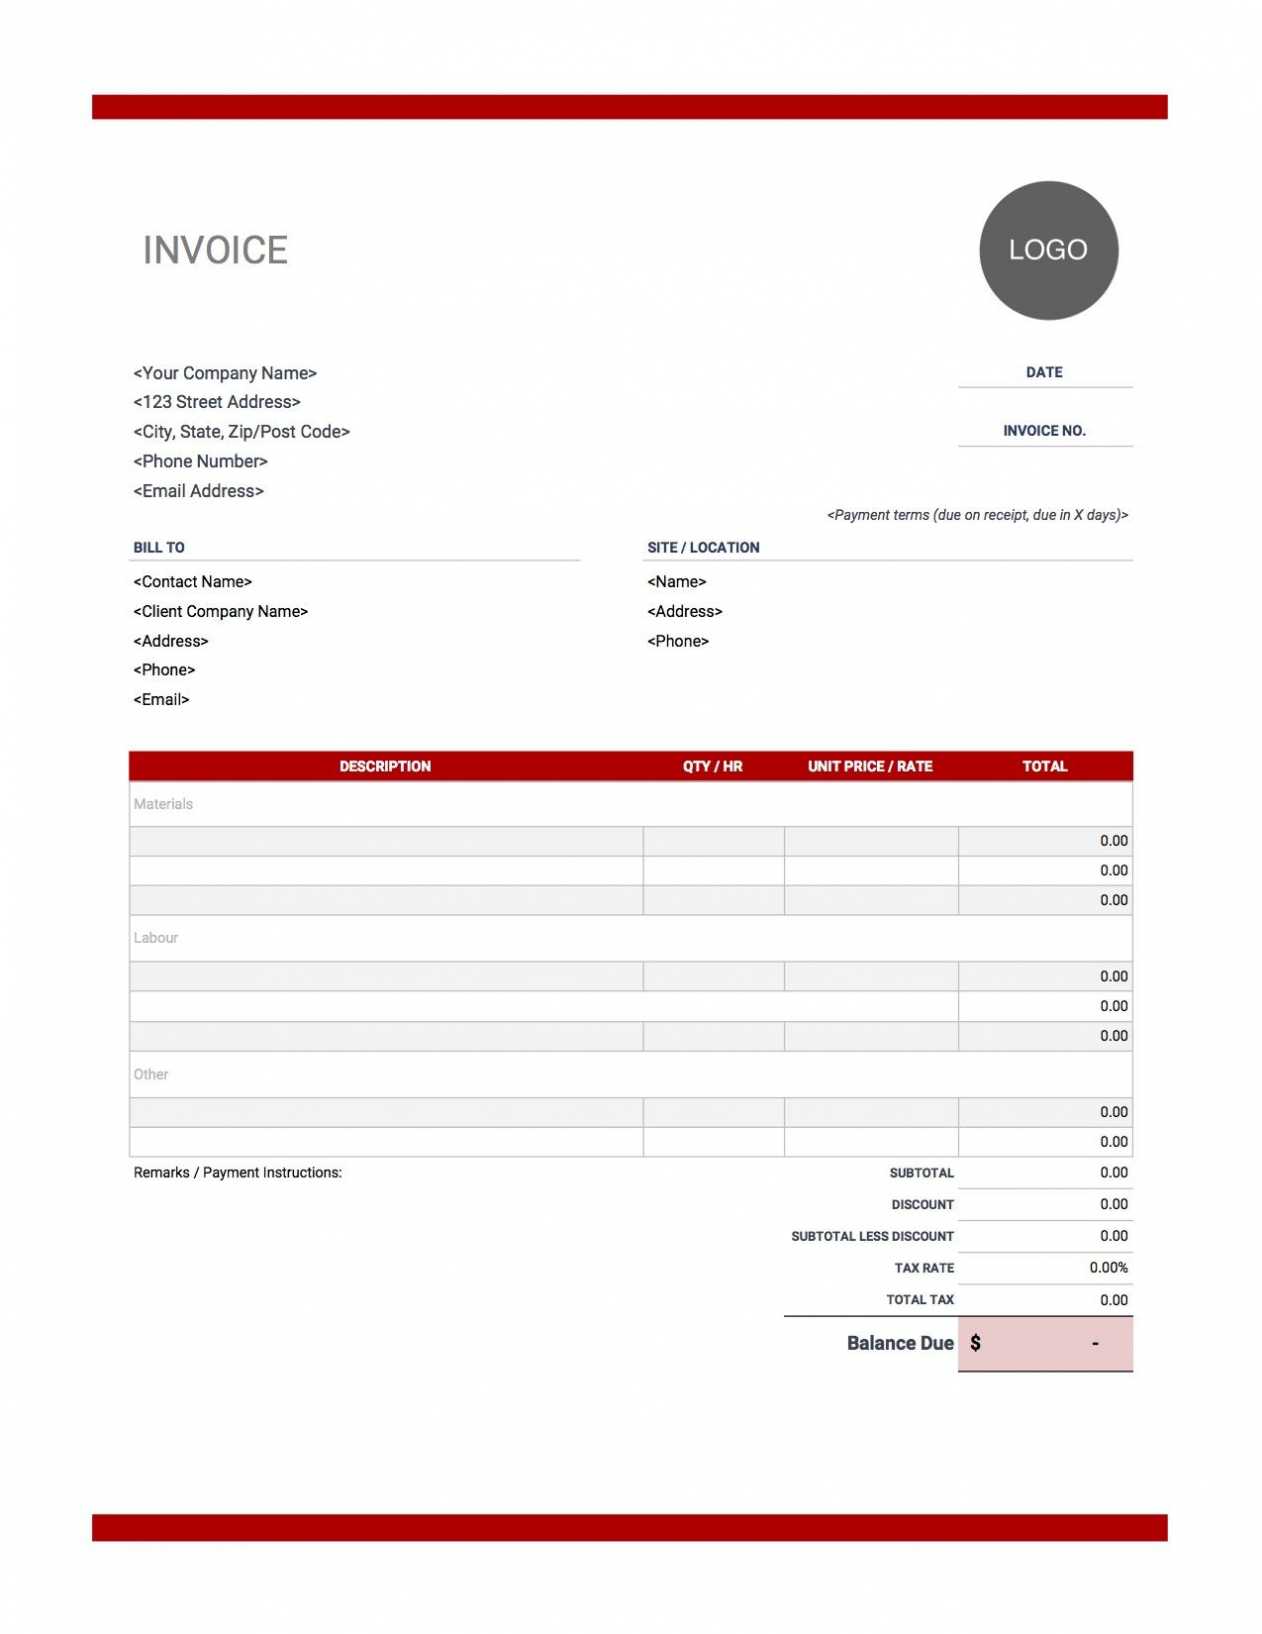 Contractor Invoice Templates | Free Download | Invoice Simple intended for Contract Labor Invoice Template